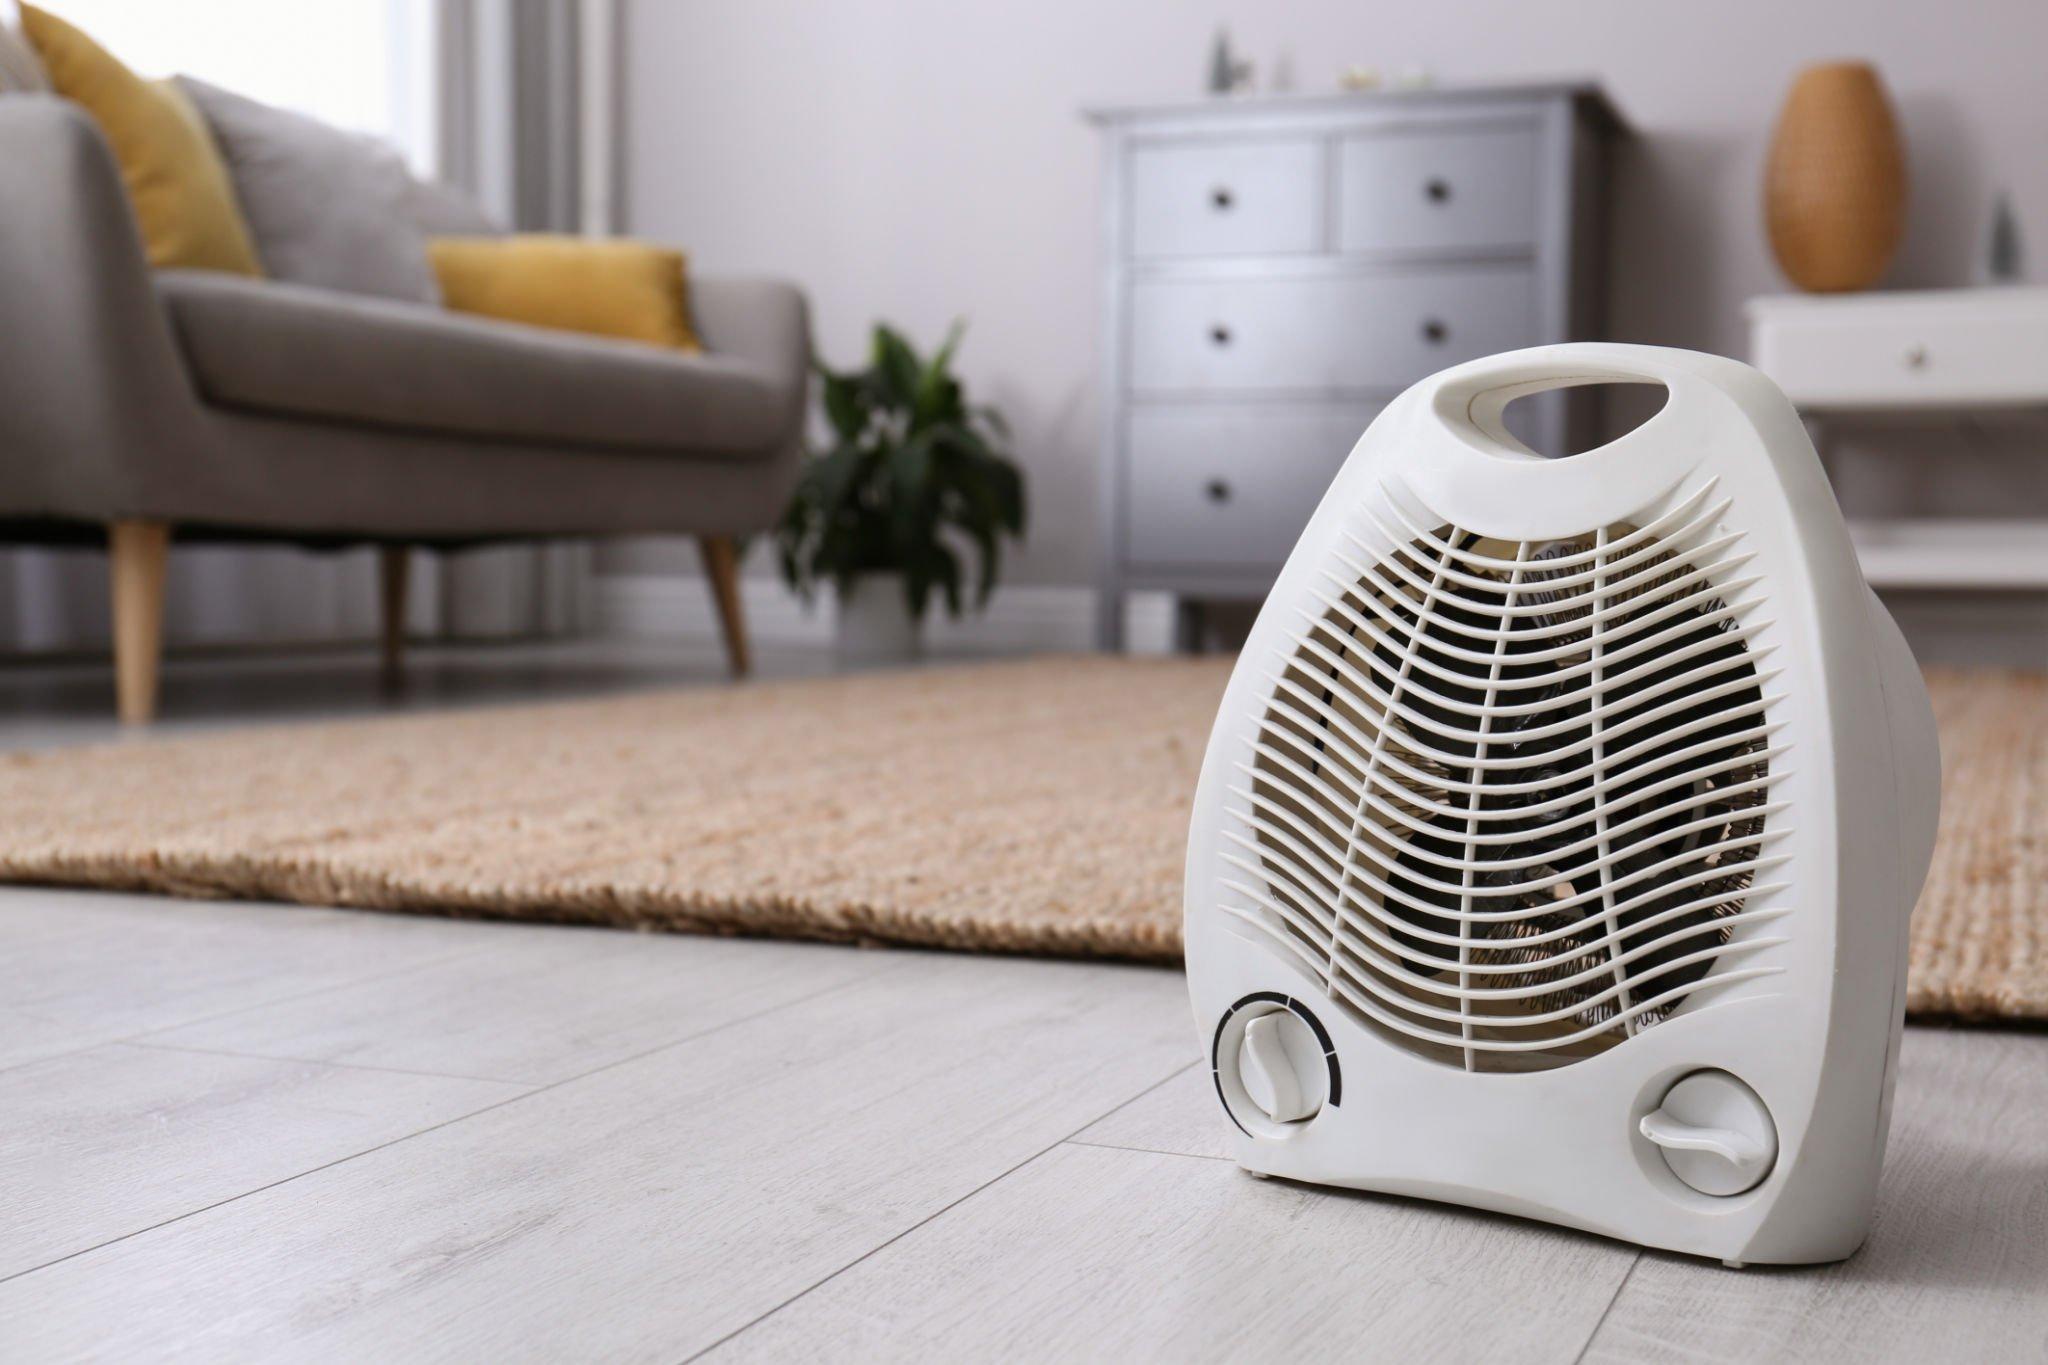 Problems And Solutions To Cold Air Blowing Off Electric Heaters